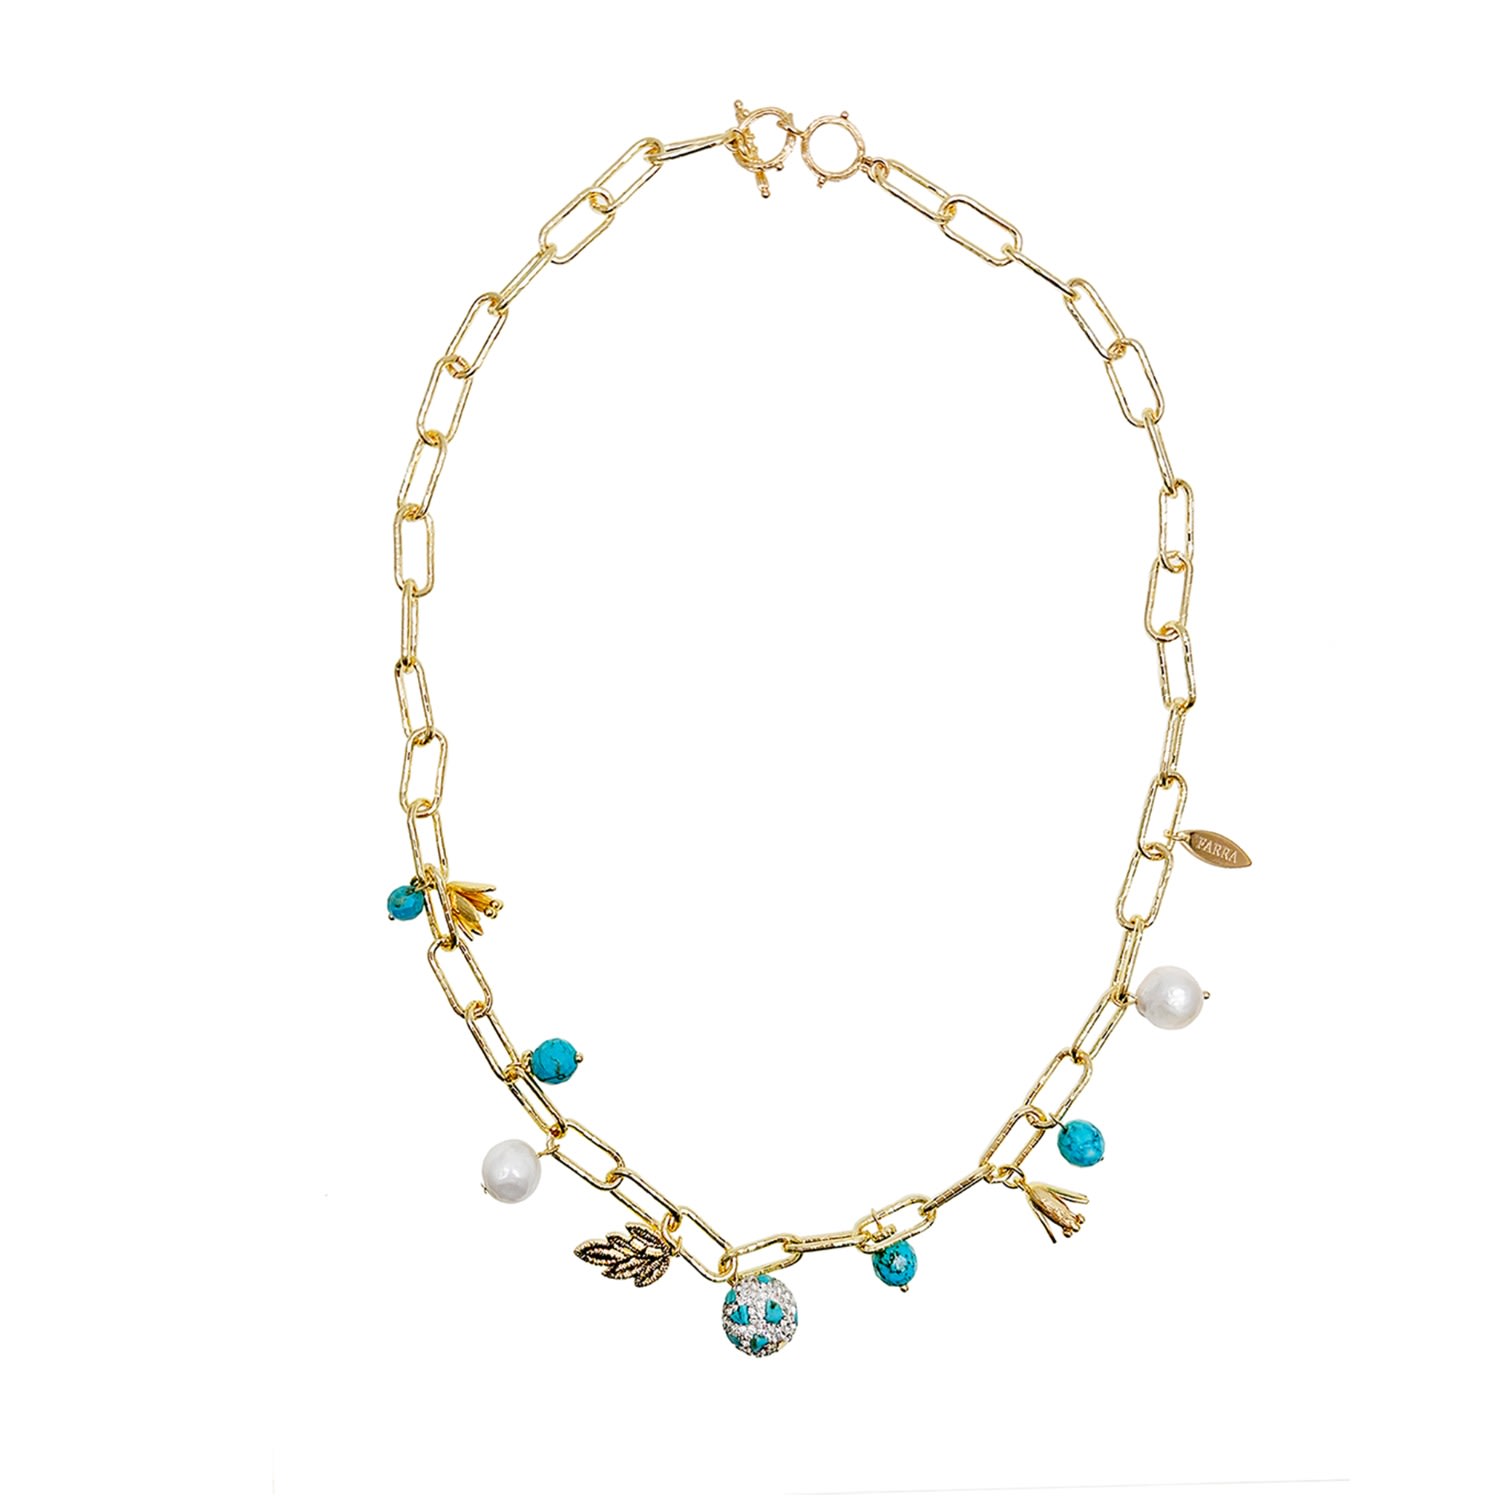 Farra Women's Blue / White Gold Chain With Turquoise And Pearls Necklace